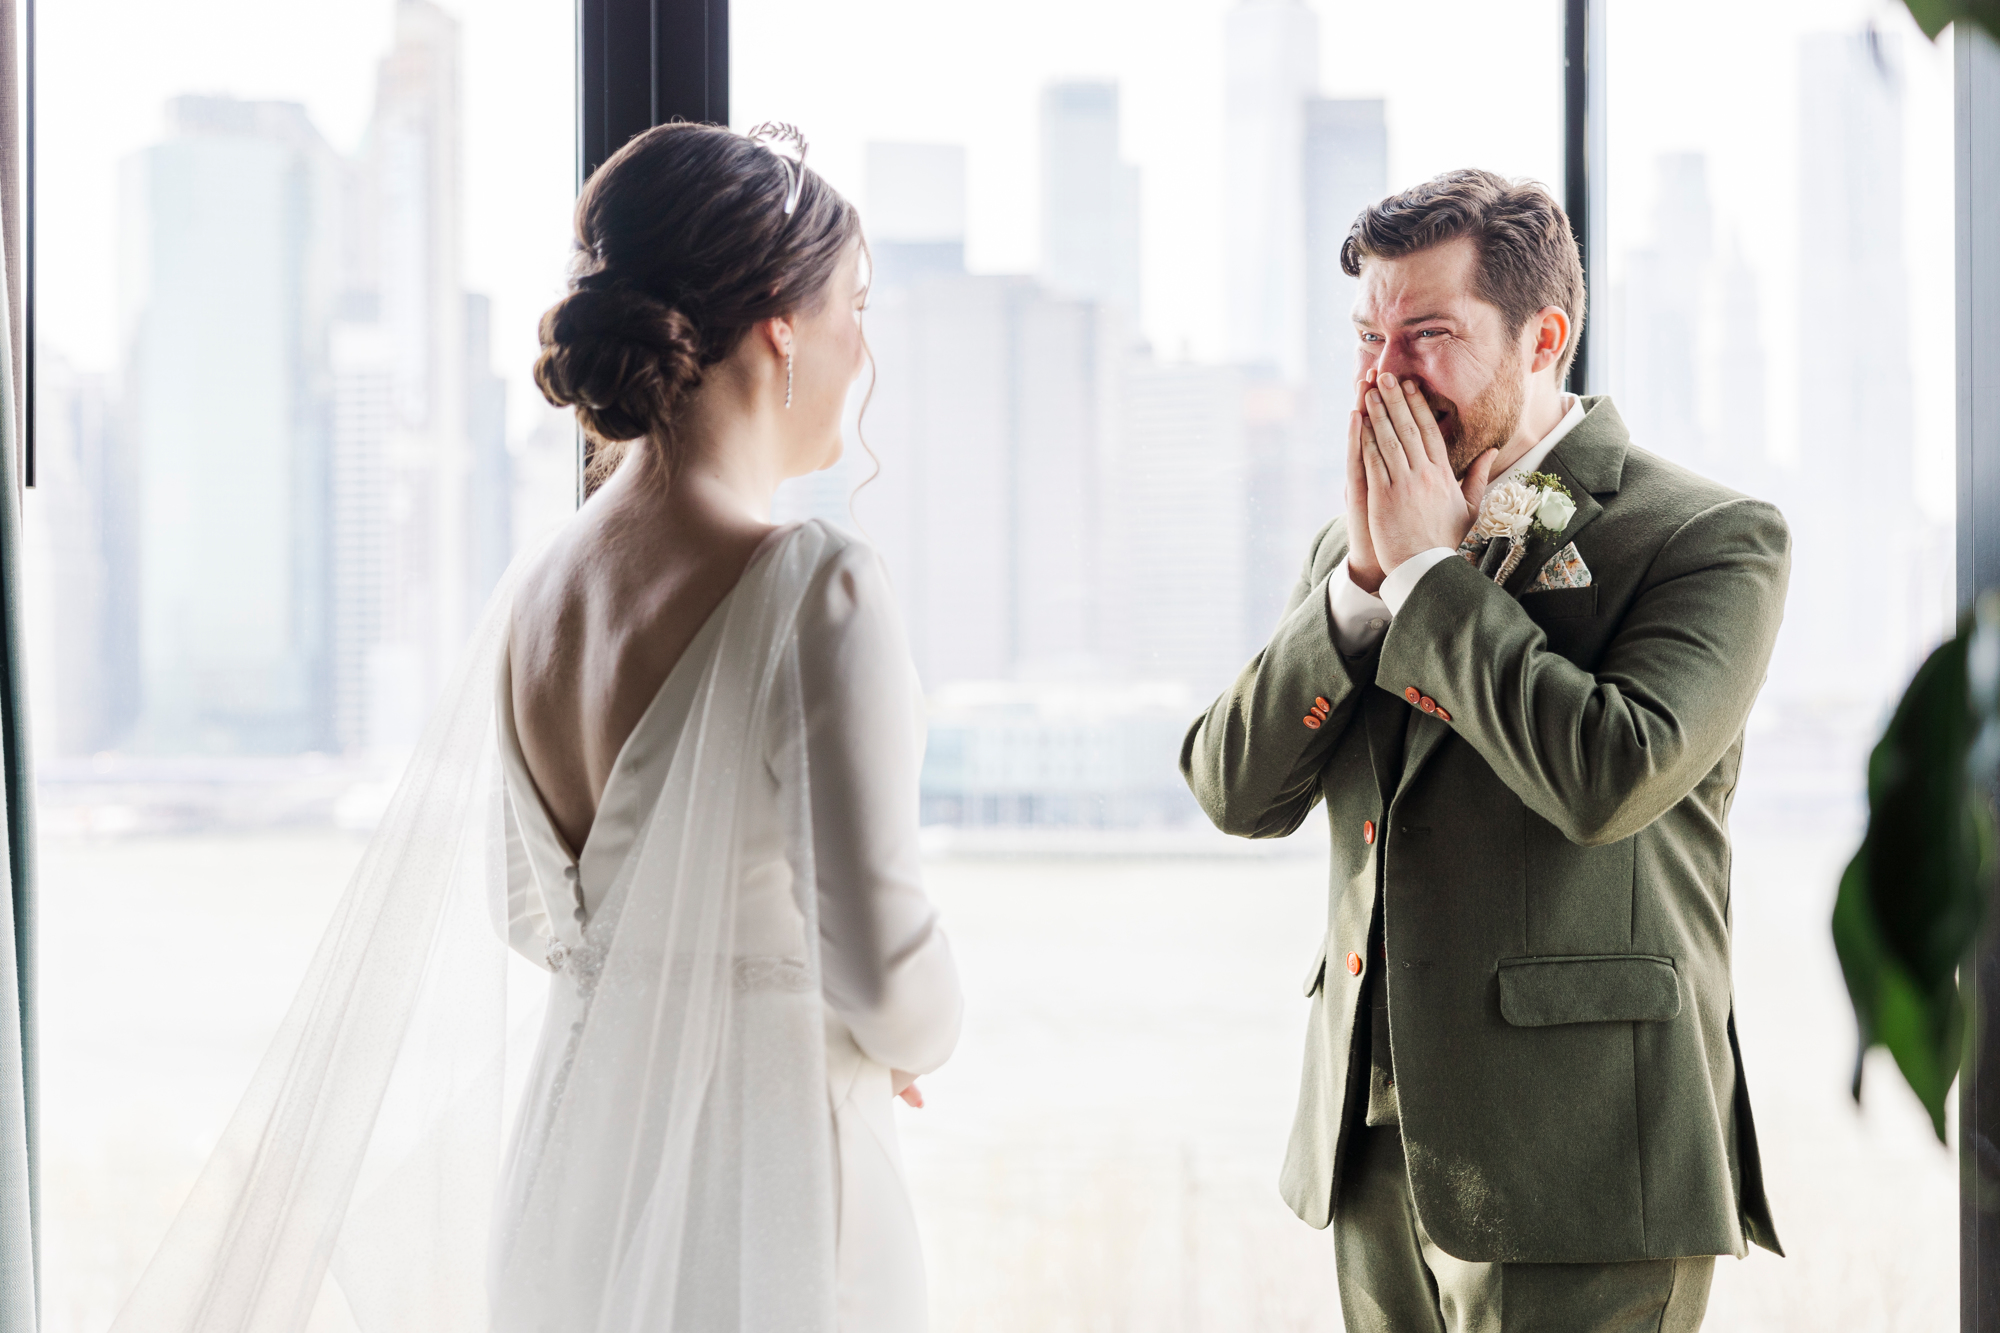 How to Increase Your Financial Value in the Wedding Photography Business